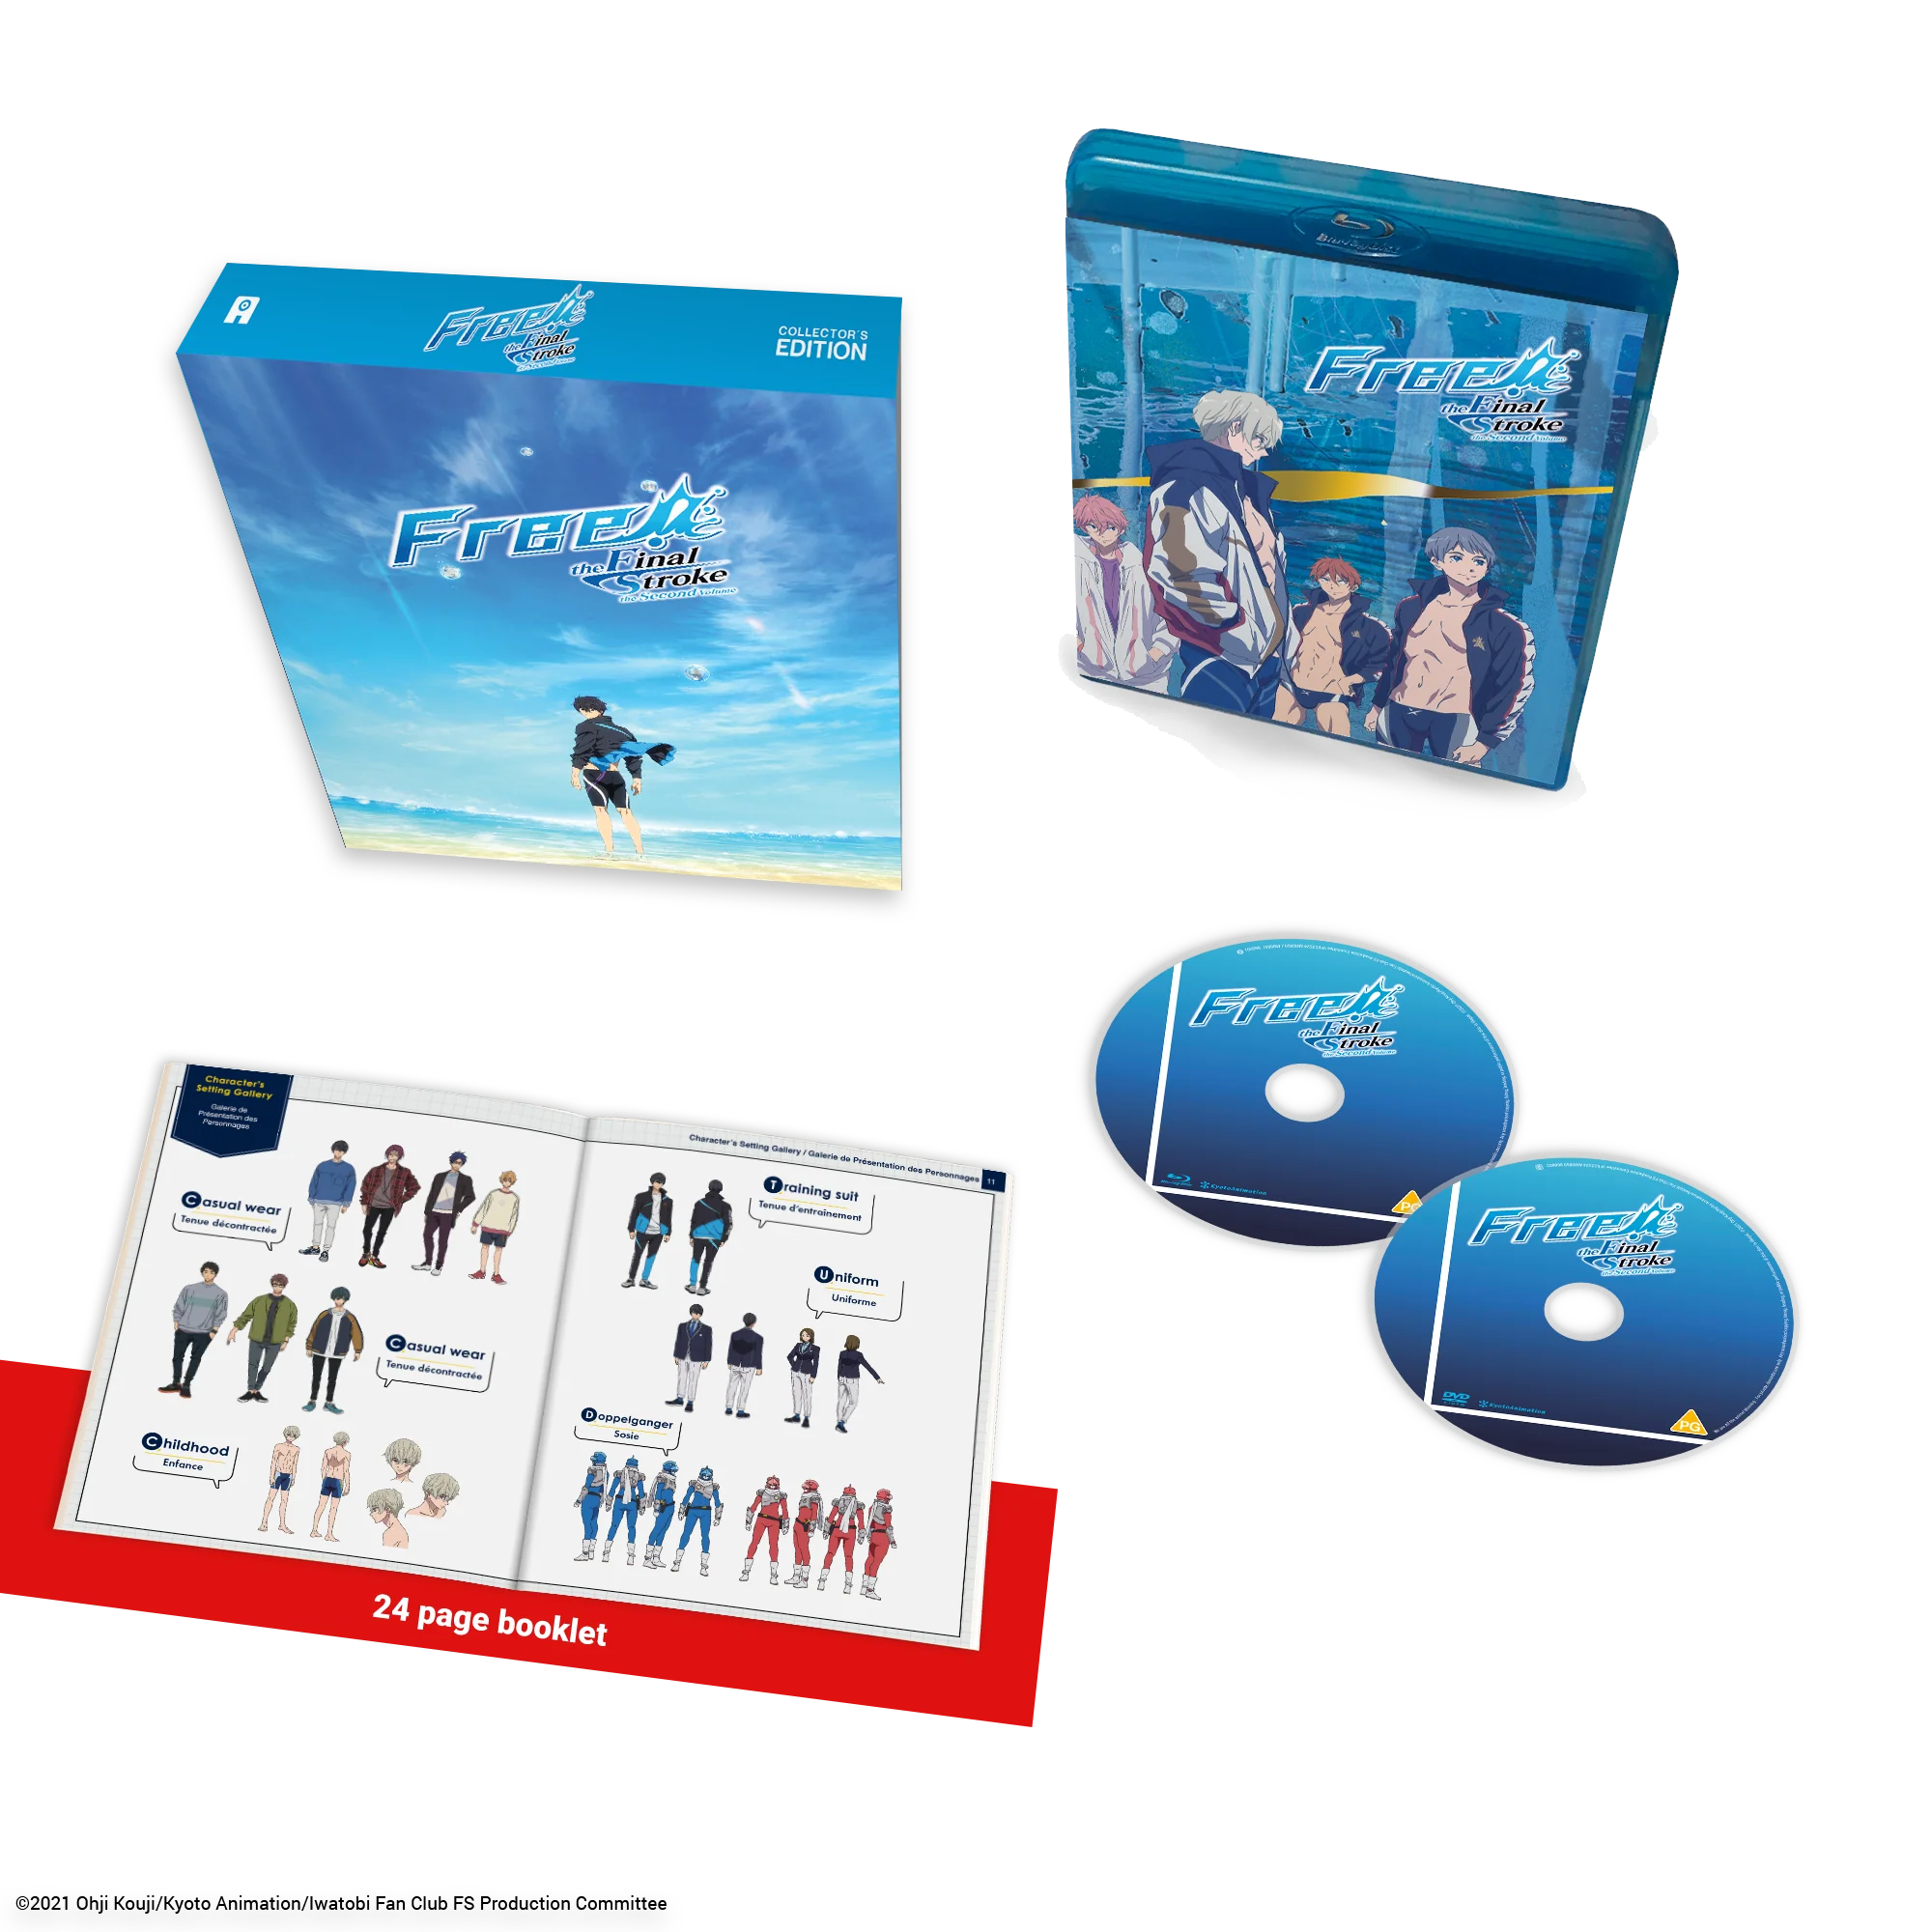 B: The Beginning UK Ultimate Edition Blu-ray Details Revealed with